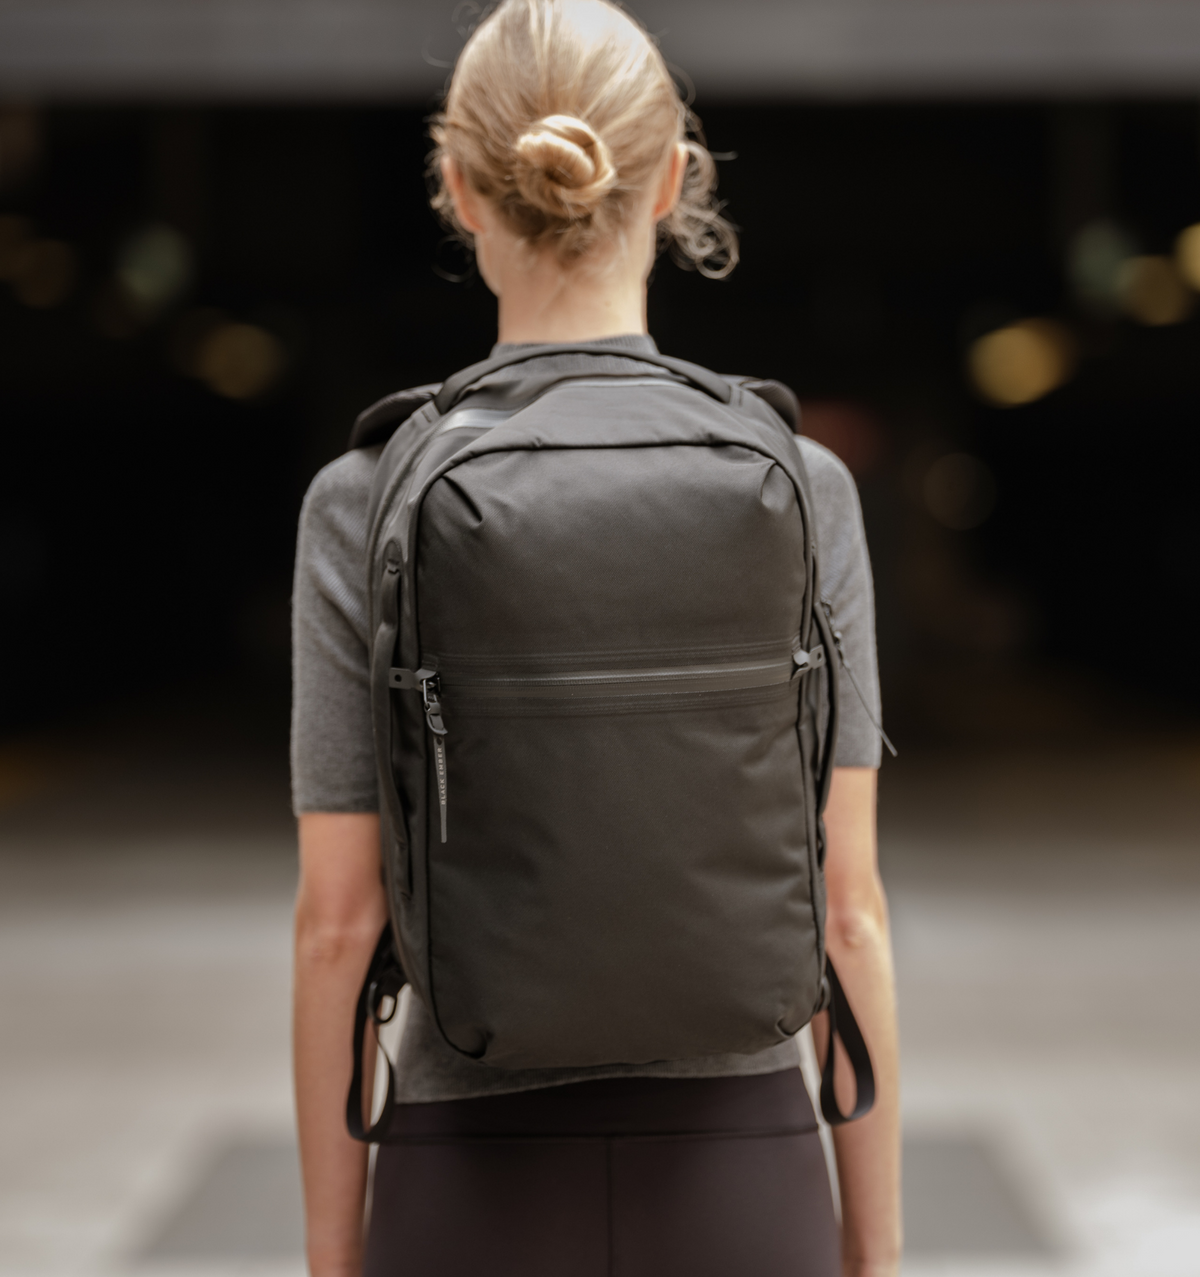 The Black Ember Shadow Backpack - Technical, Sophisticated Yet